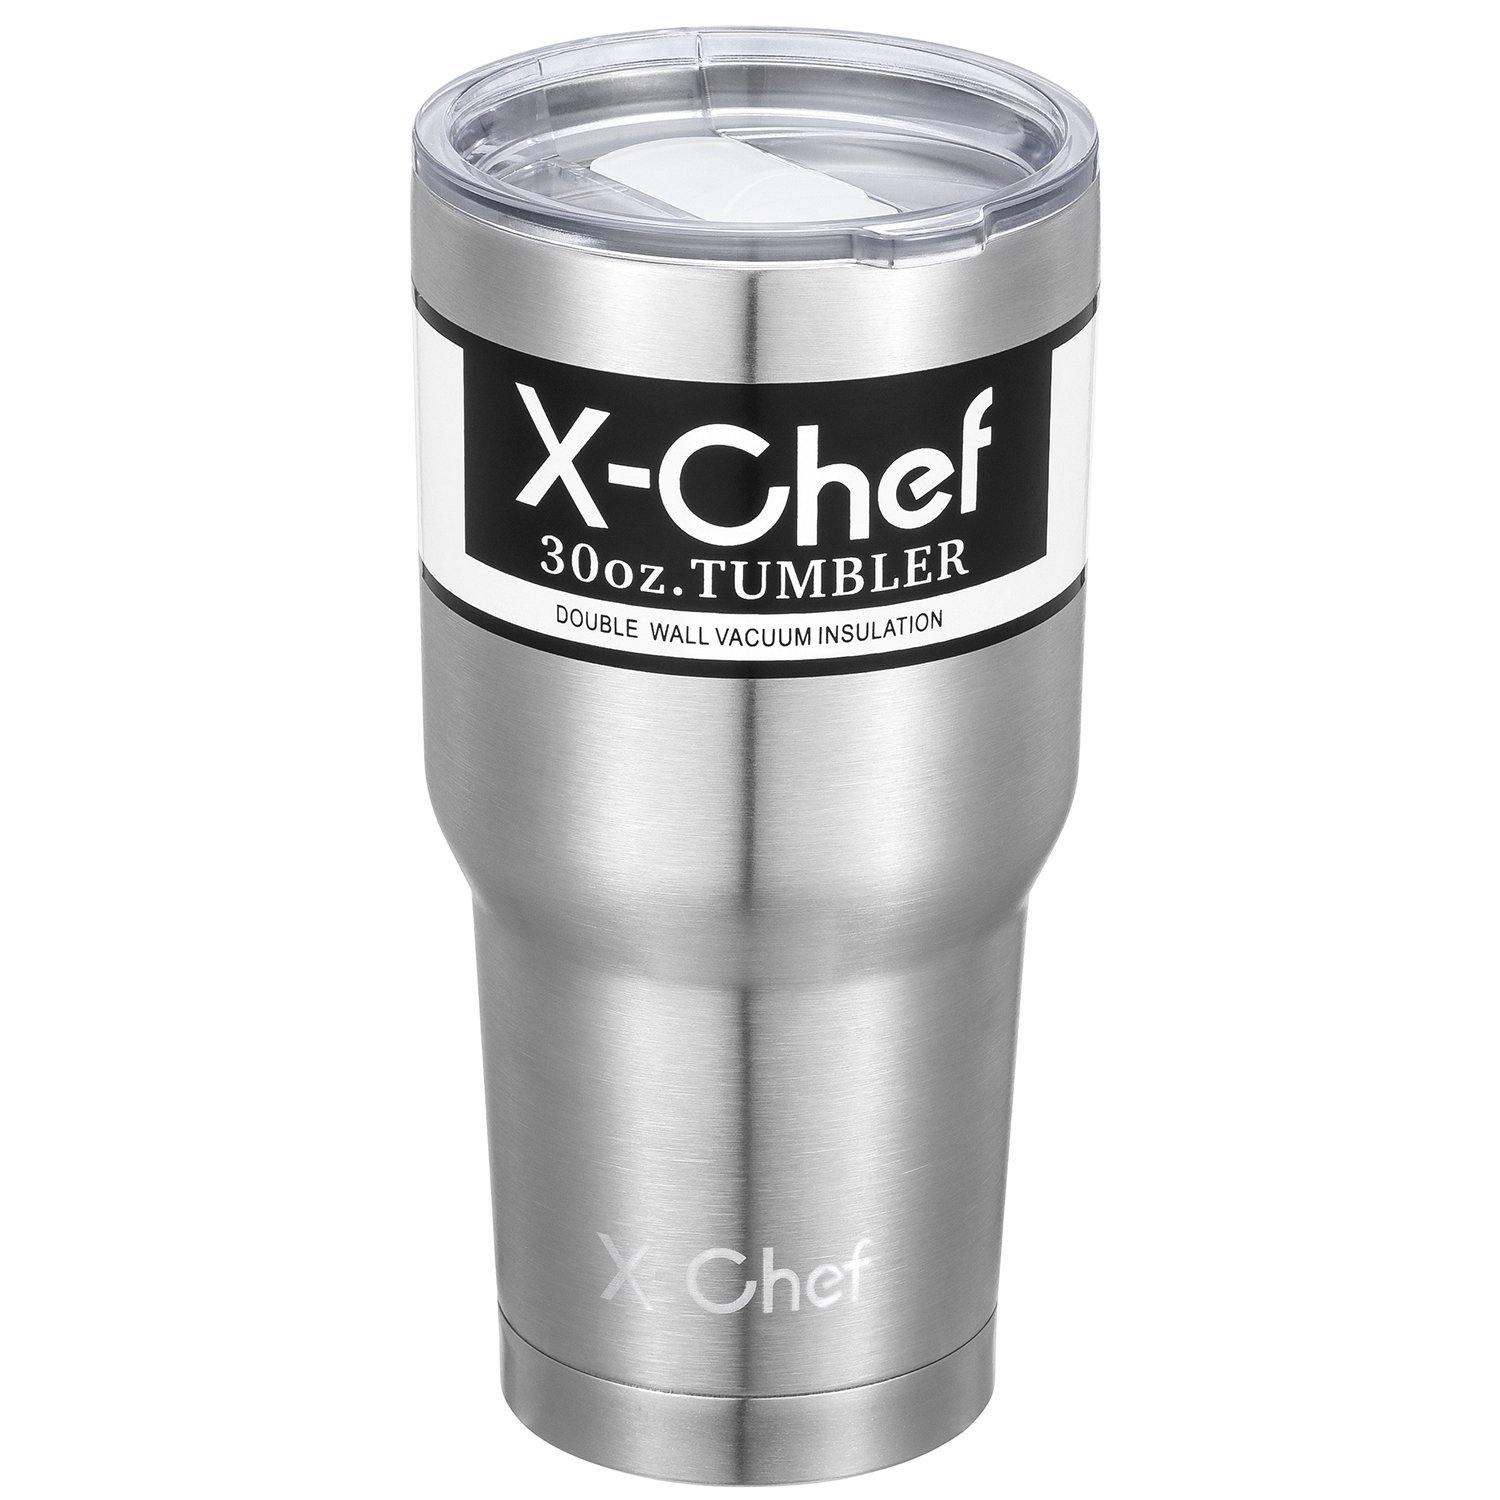 X-Chef 30oz stainless steel insulated tumbler for $8